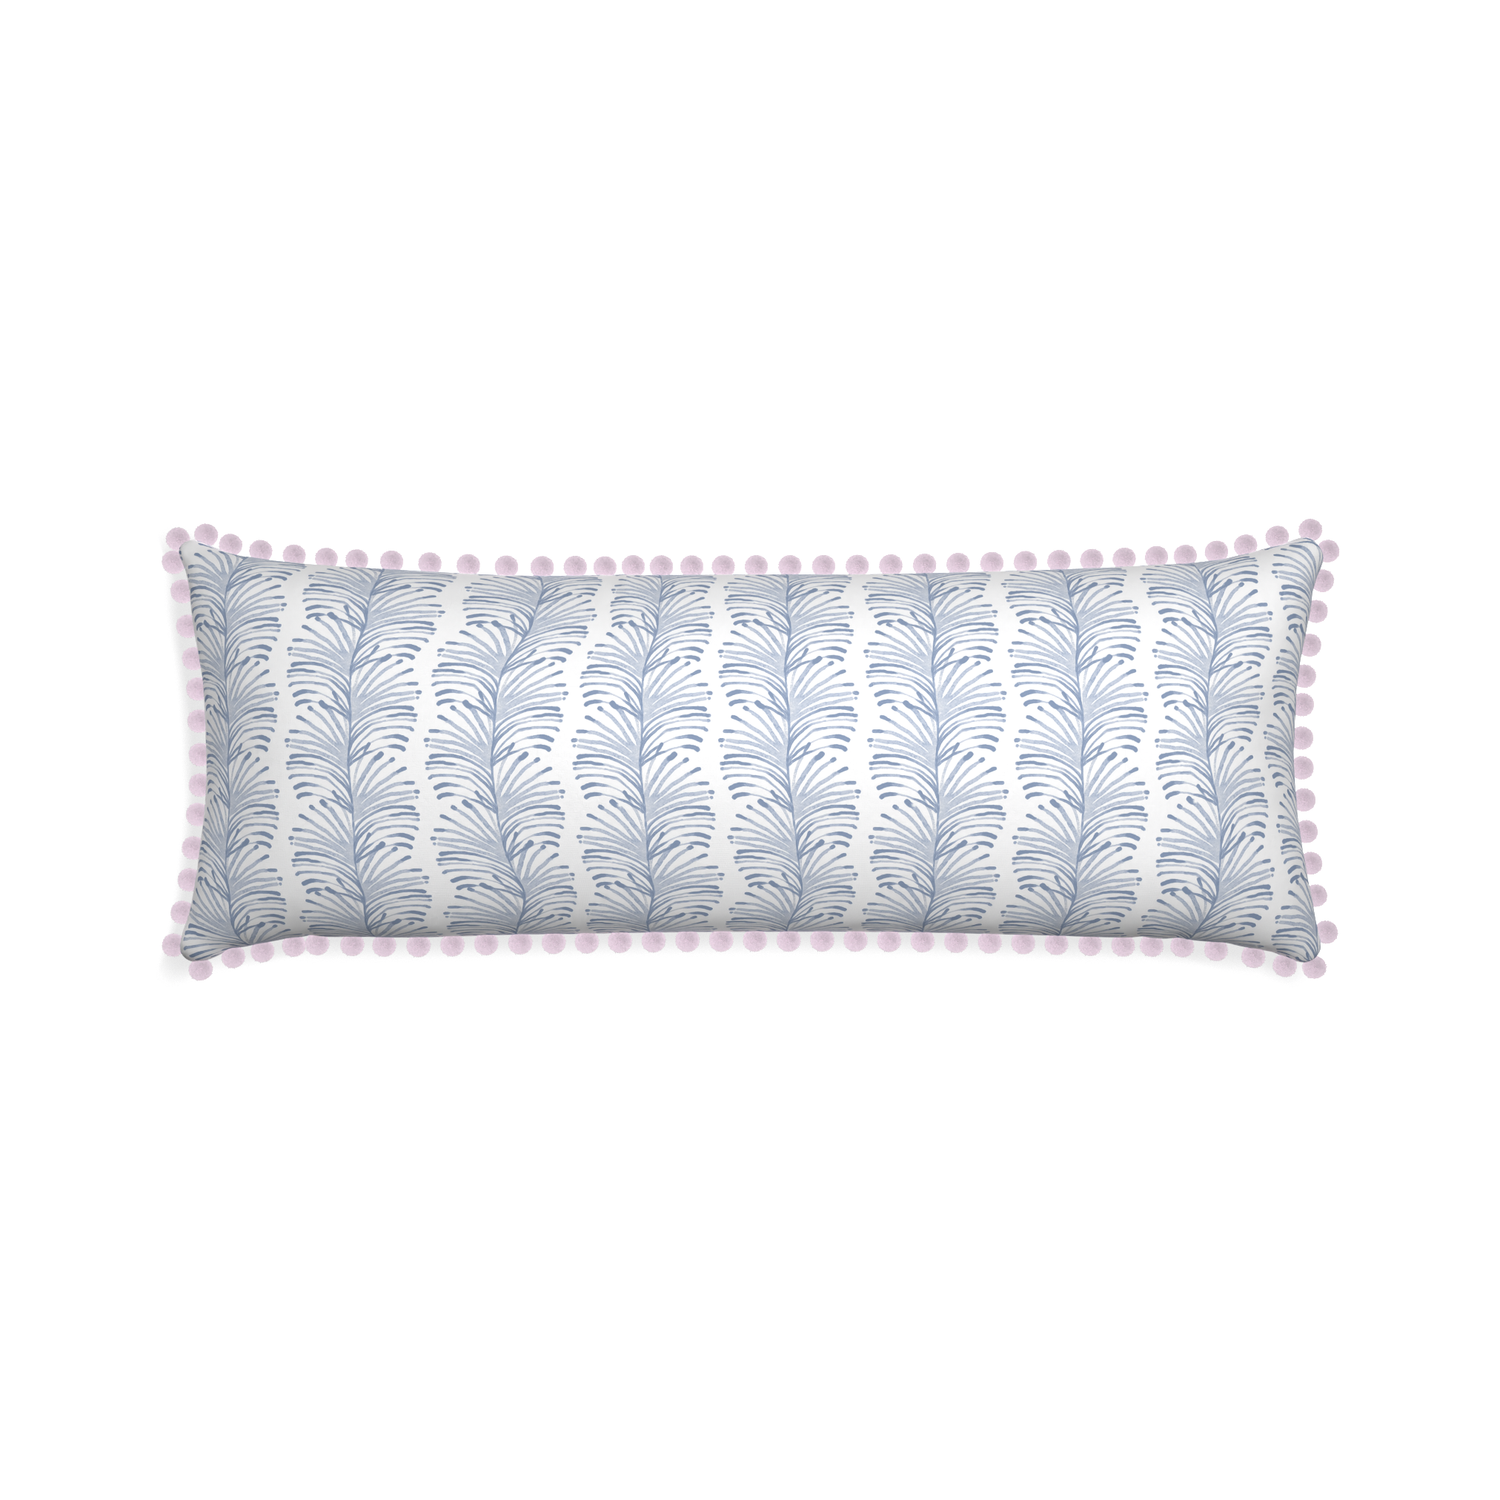 Xl-lumbar emma sky custom pillow with l on white background